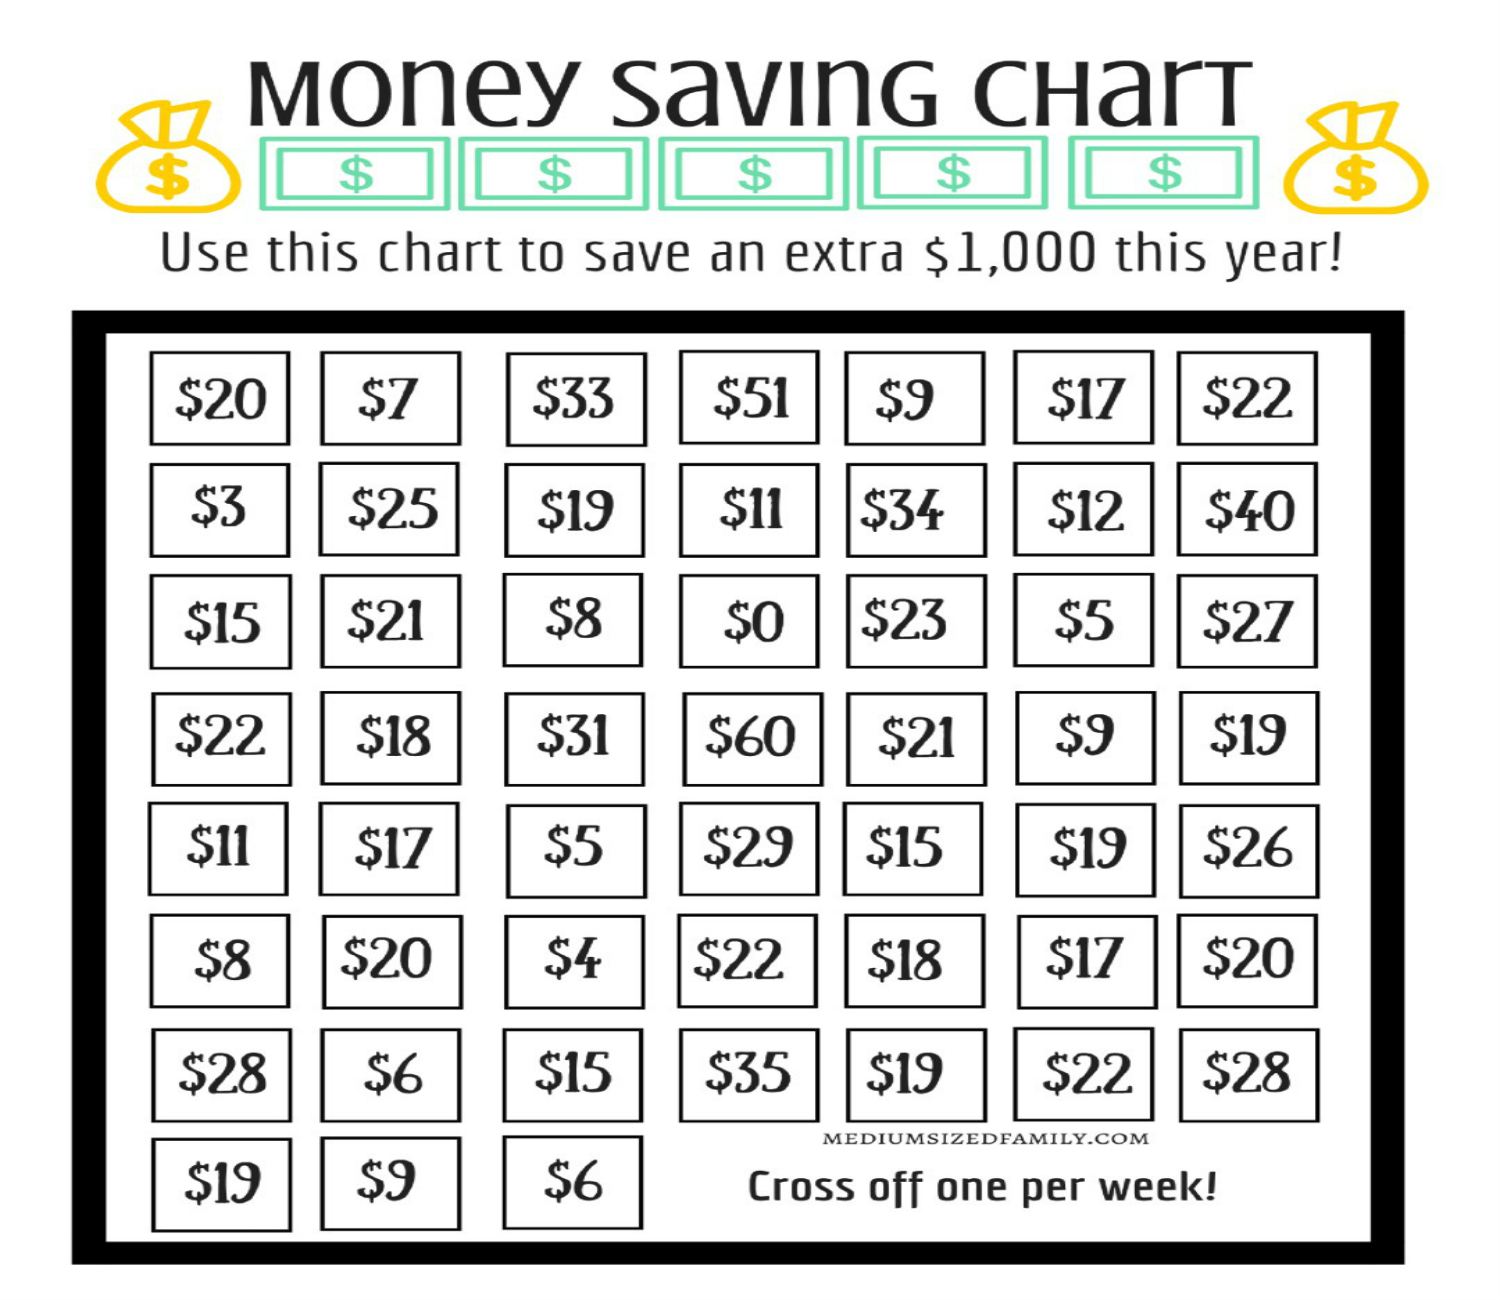 Genius Chart Shows The Easiest Way To Save 1,000 In One Year